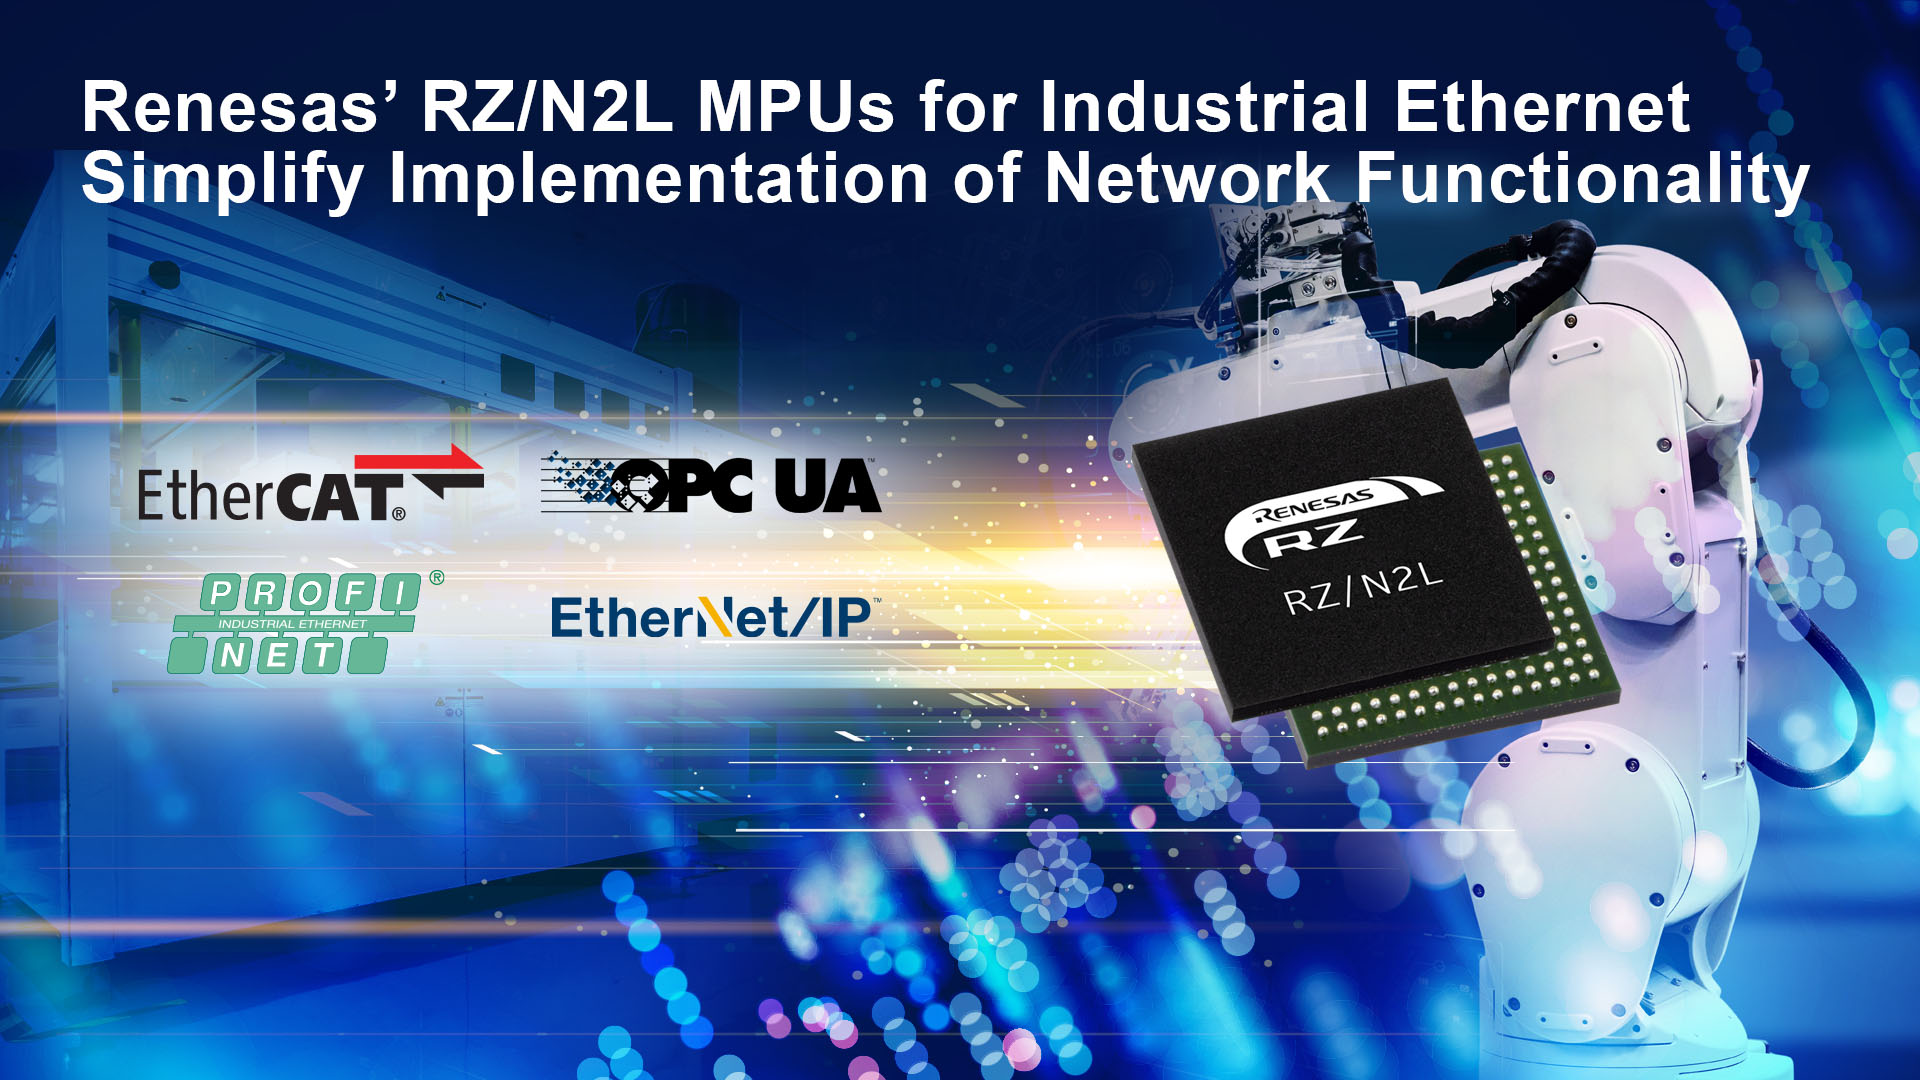 MPUs for Industrial Ethernet Simplify Implementation of Network Functionality